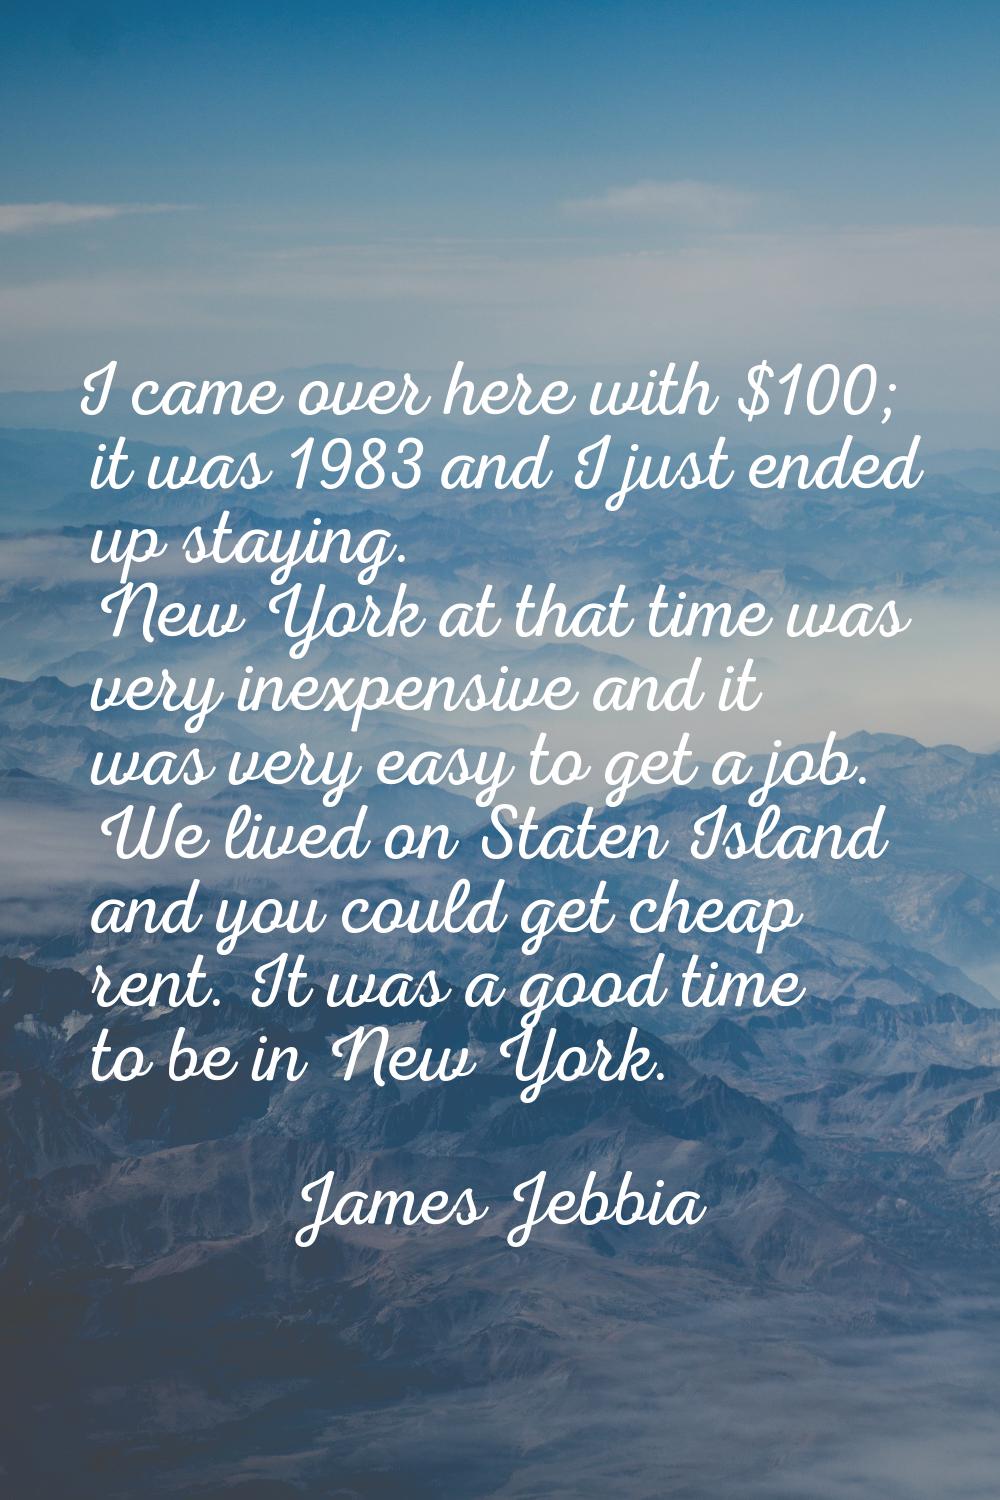 I came over here with $100; it was 1983 and I just ended up staying. New York at that time was very